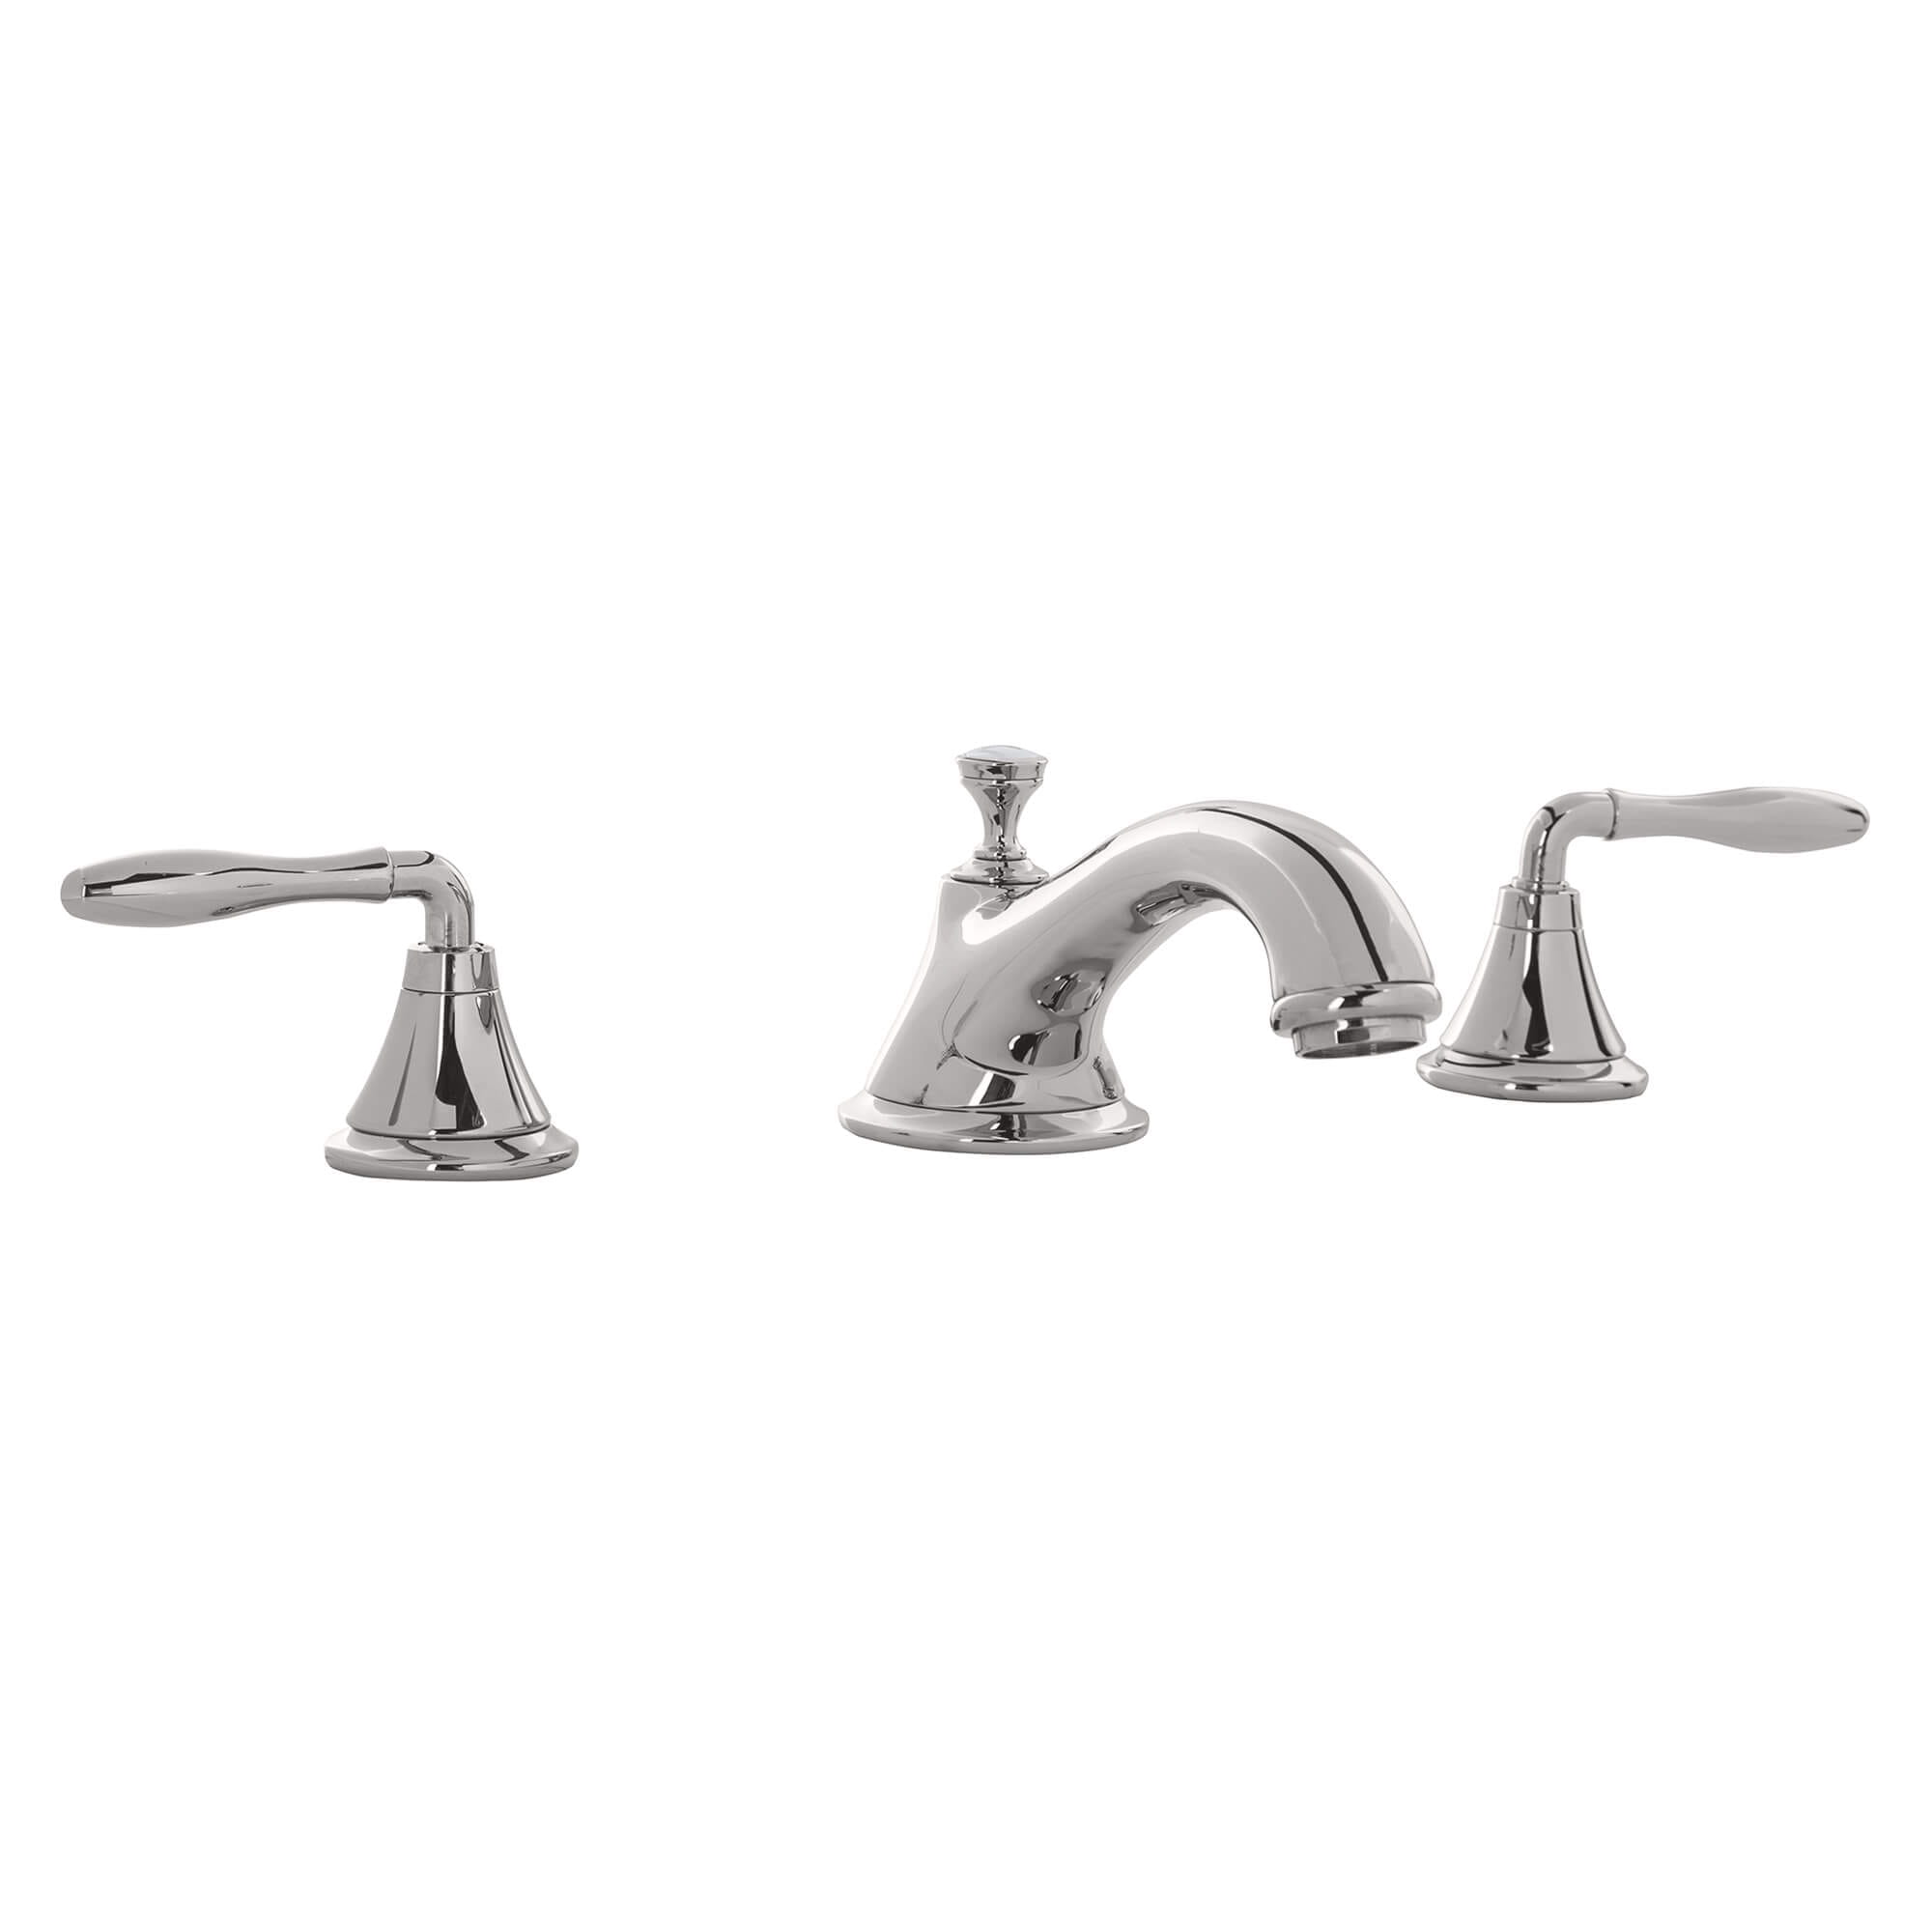 Seabury Manette leviers la paire GROHE POLISHED NICKEL